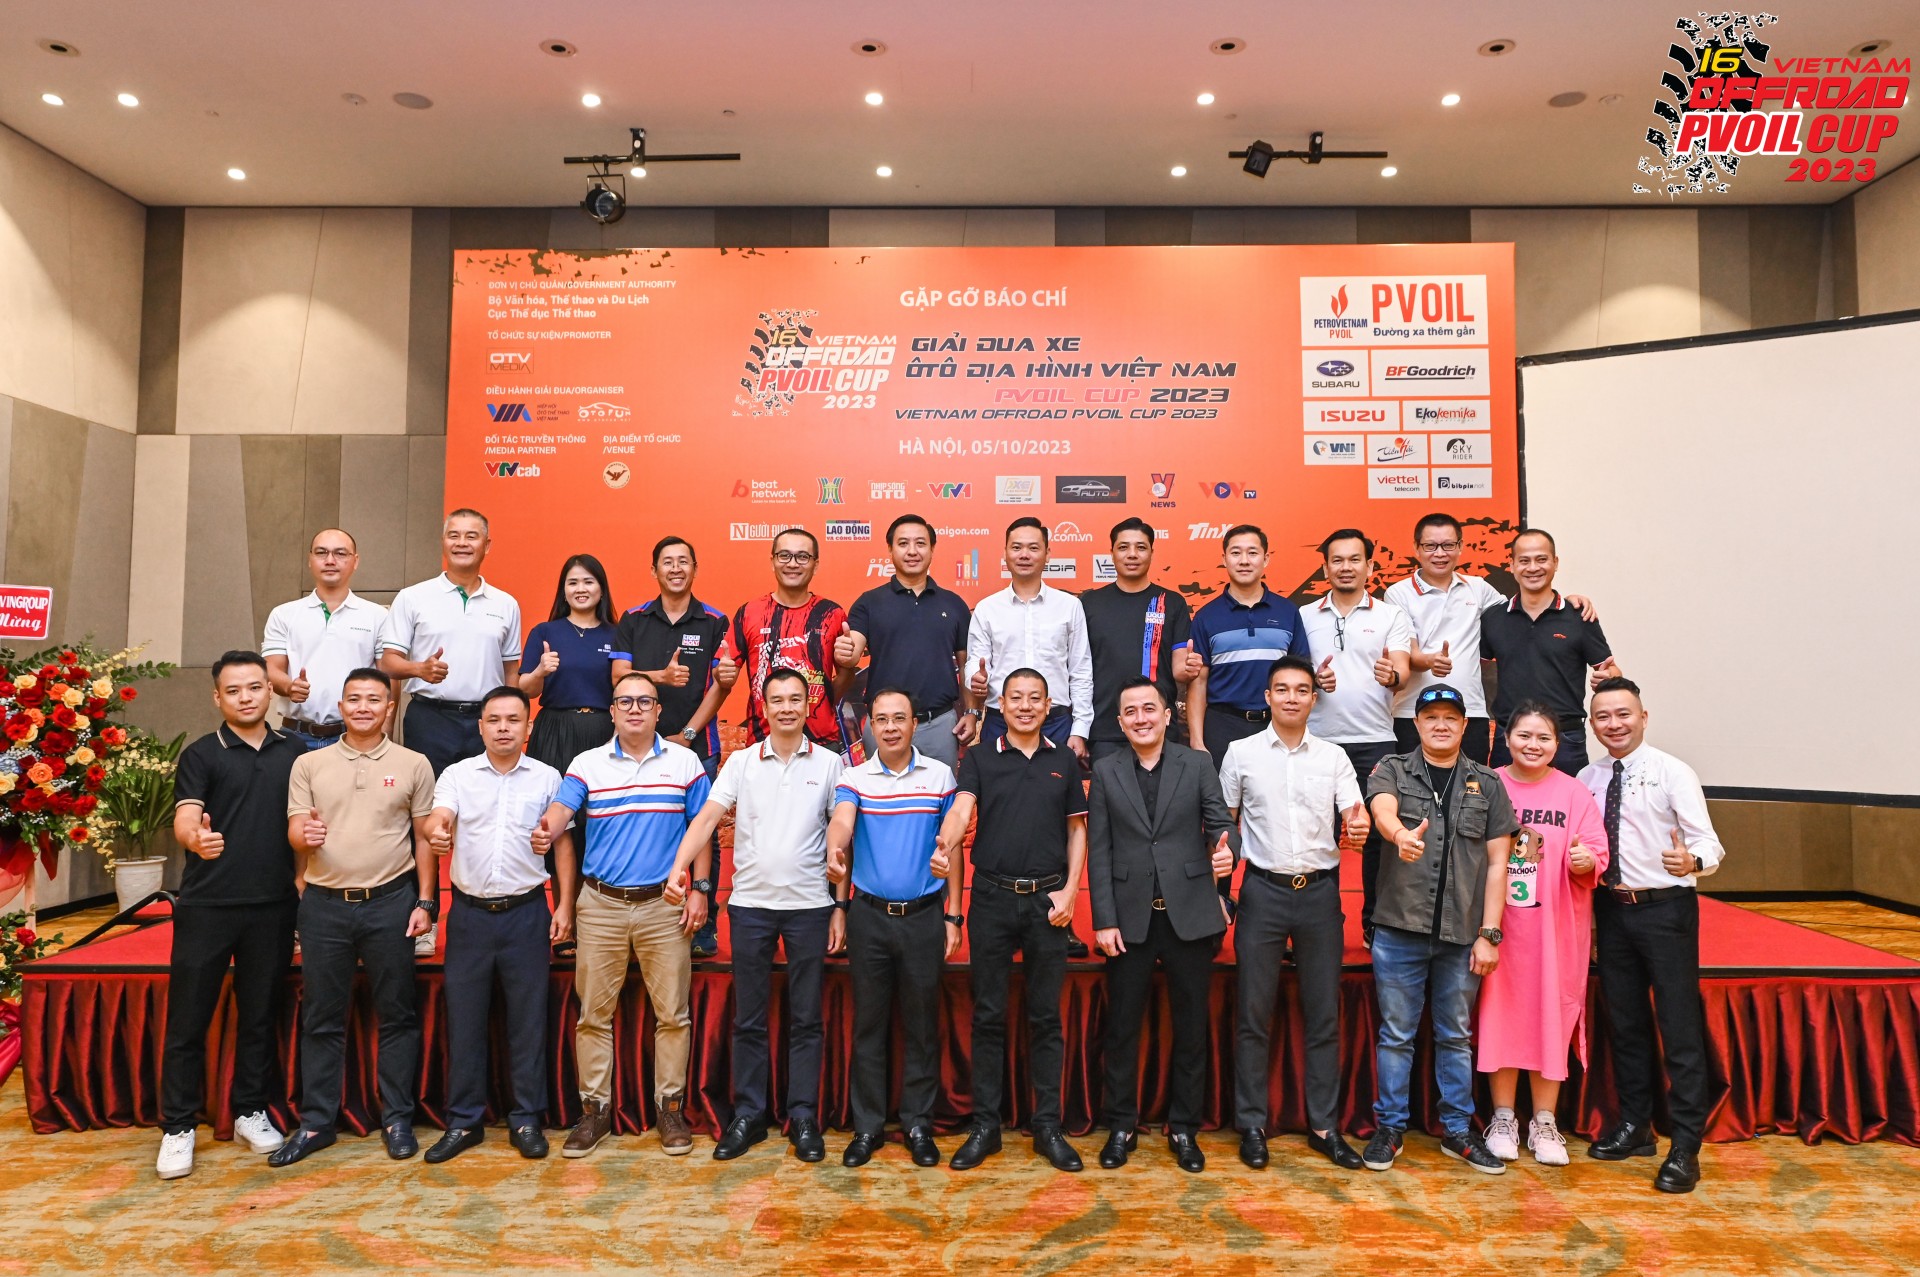 [4] [PVOIL VOC 2023] Vietnam Offroad PVOIL Cup 2023 will take place on October 27-29